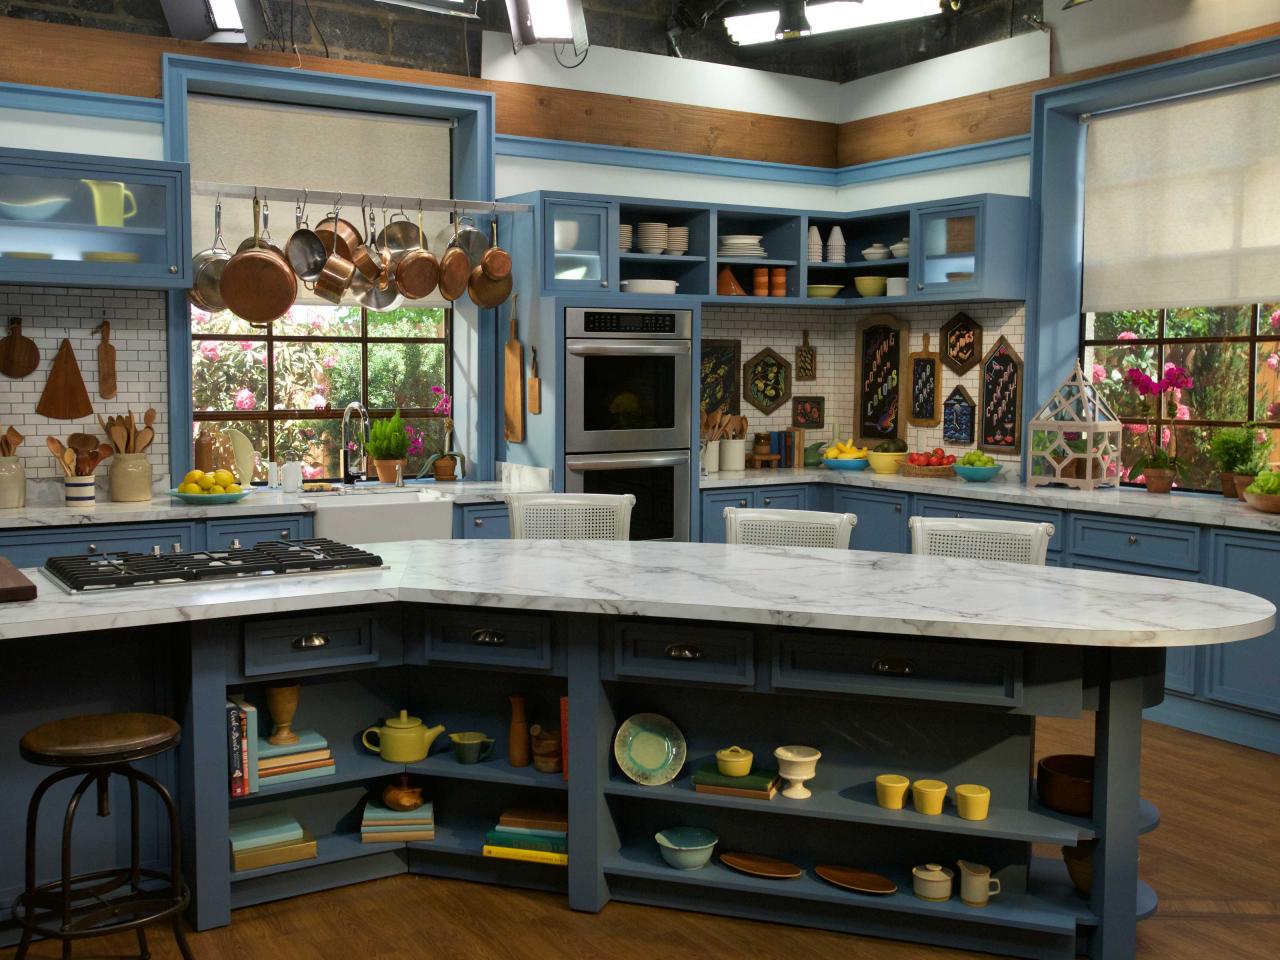 Add Color to Your Kitchen with Tie Dye Towels, FN Dish -  Behind-the-Scenes, Food Trends, and Best Recipes : Food Network